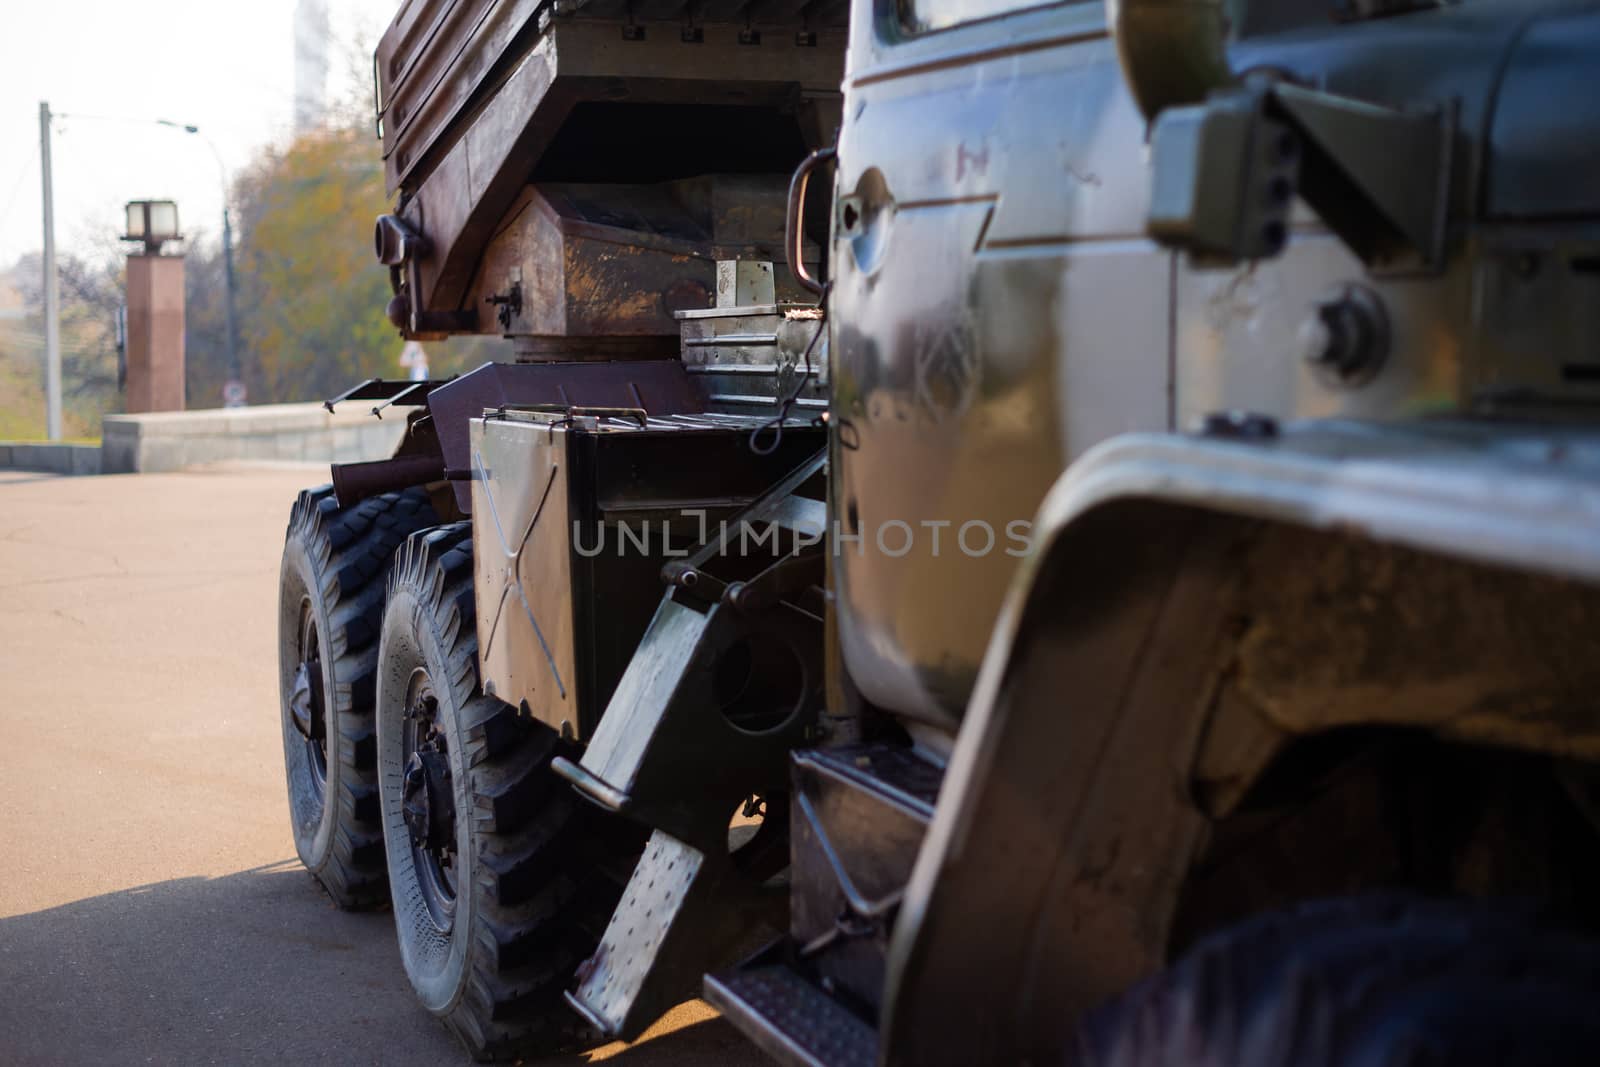 Camouflage military truck with rocket launcher. Outdoor military vehicles museum. Armor is damaged at the battlefield.